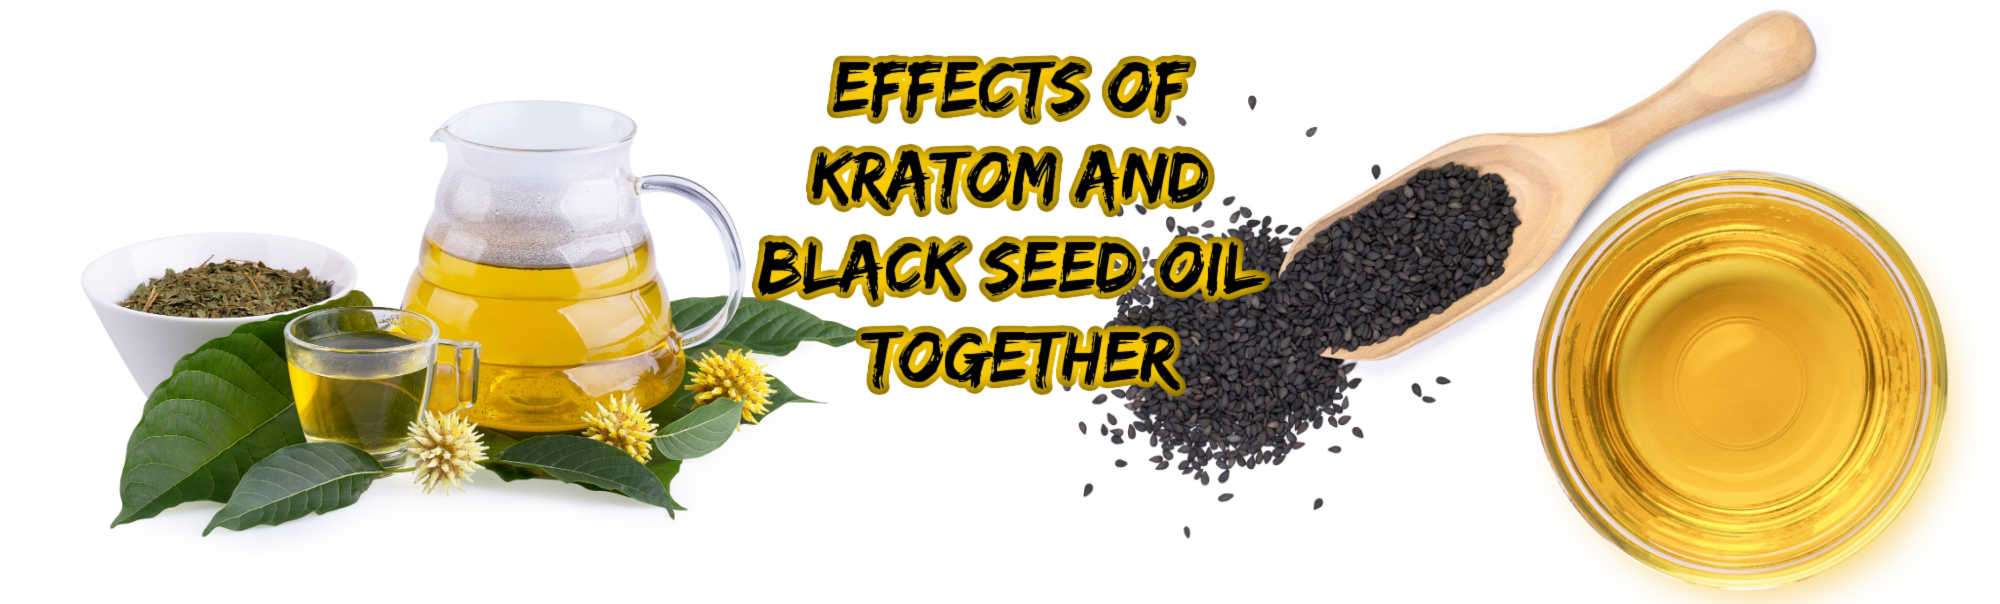 image of kratom and black seed oil effects